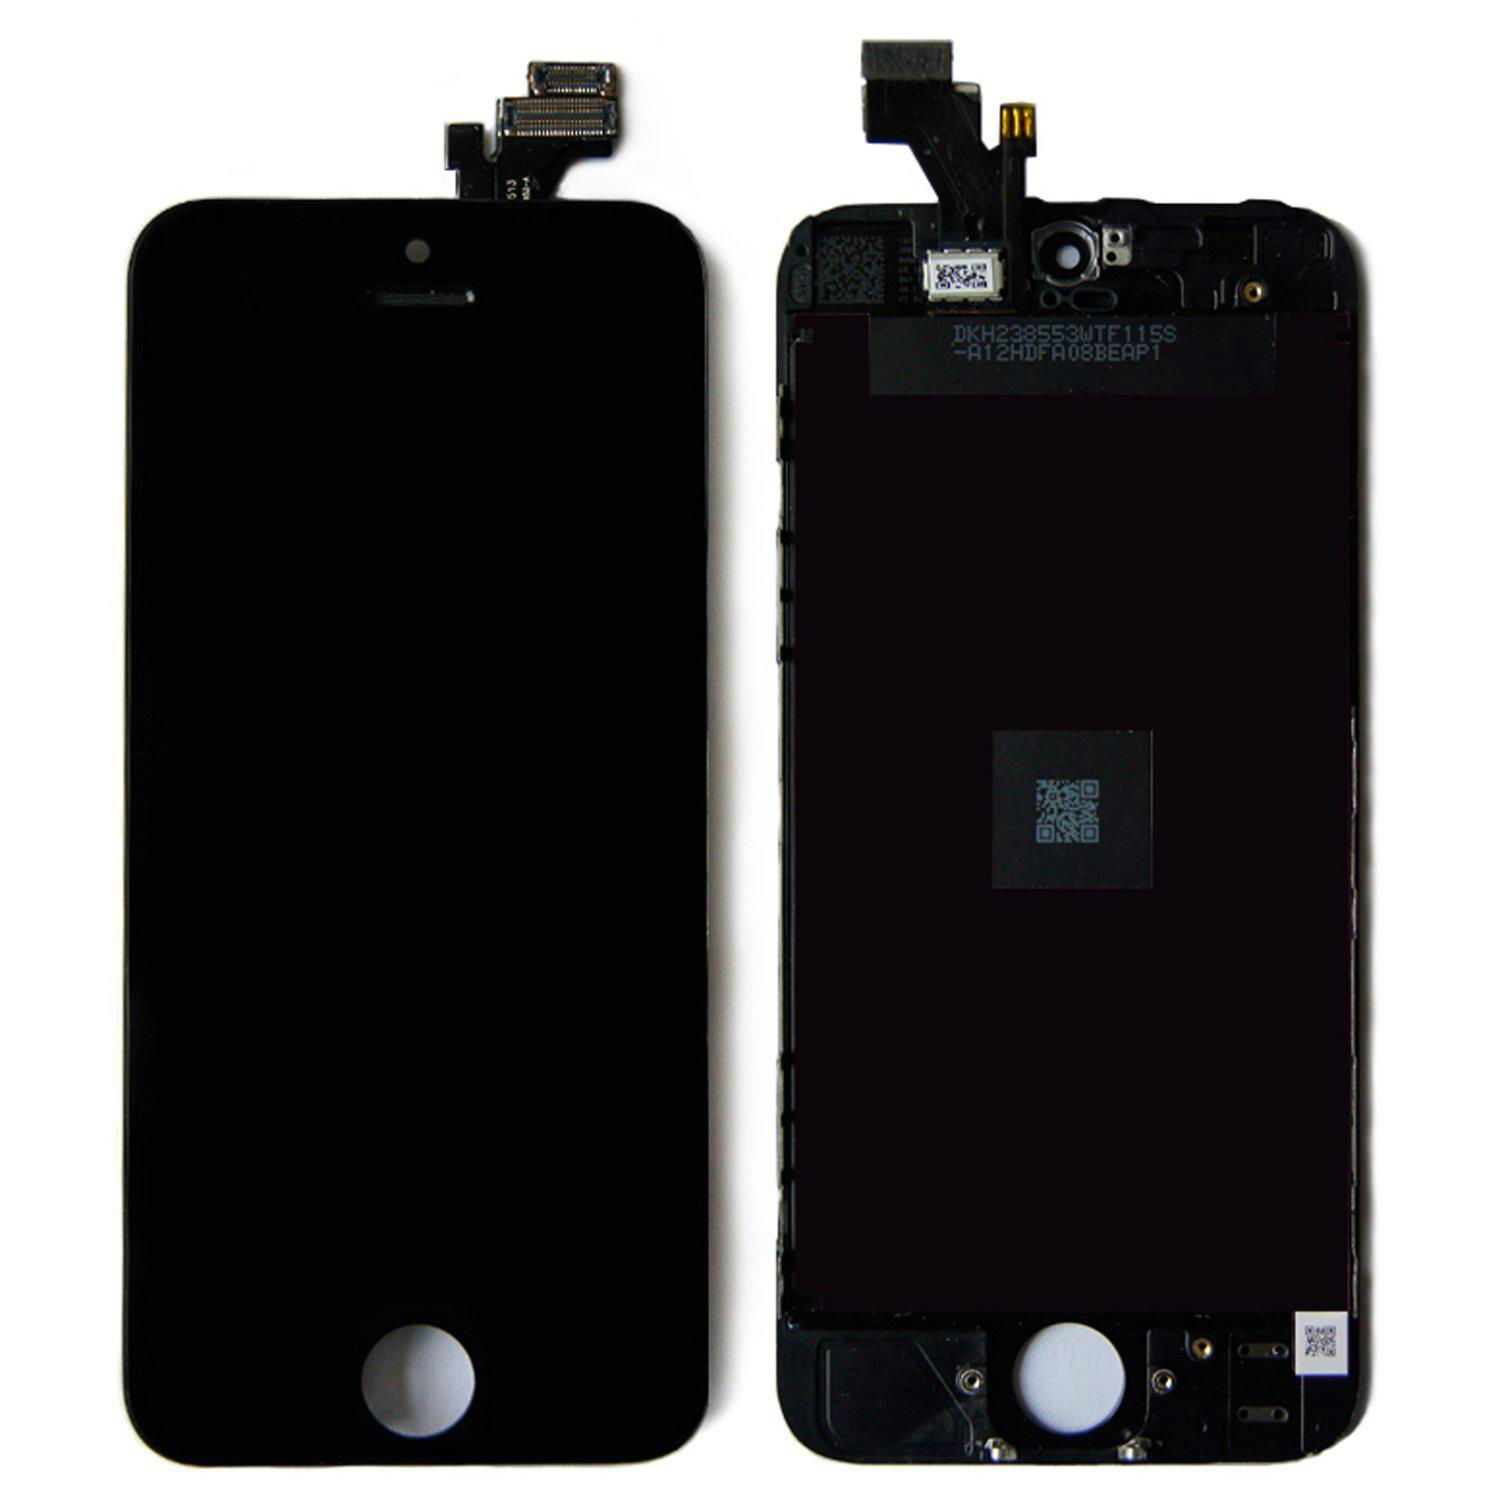 LCD Display Screen with Touch Screen Digitizer for iPhone 5 - Black